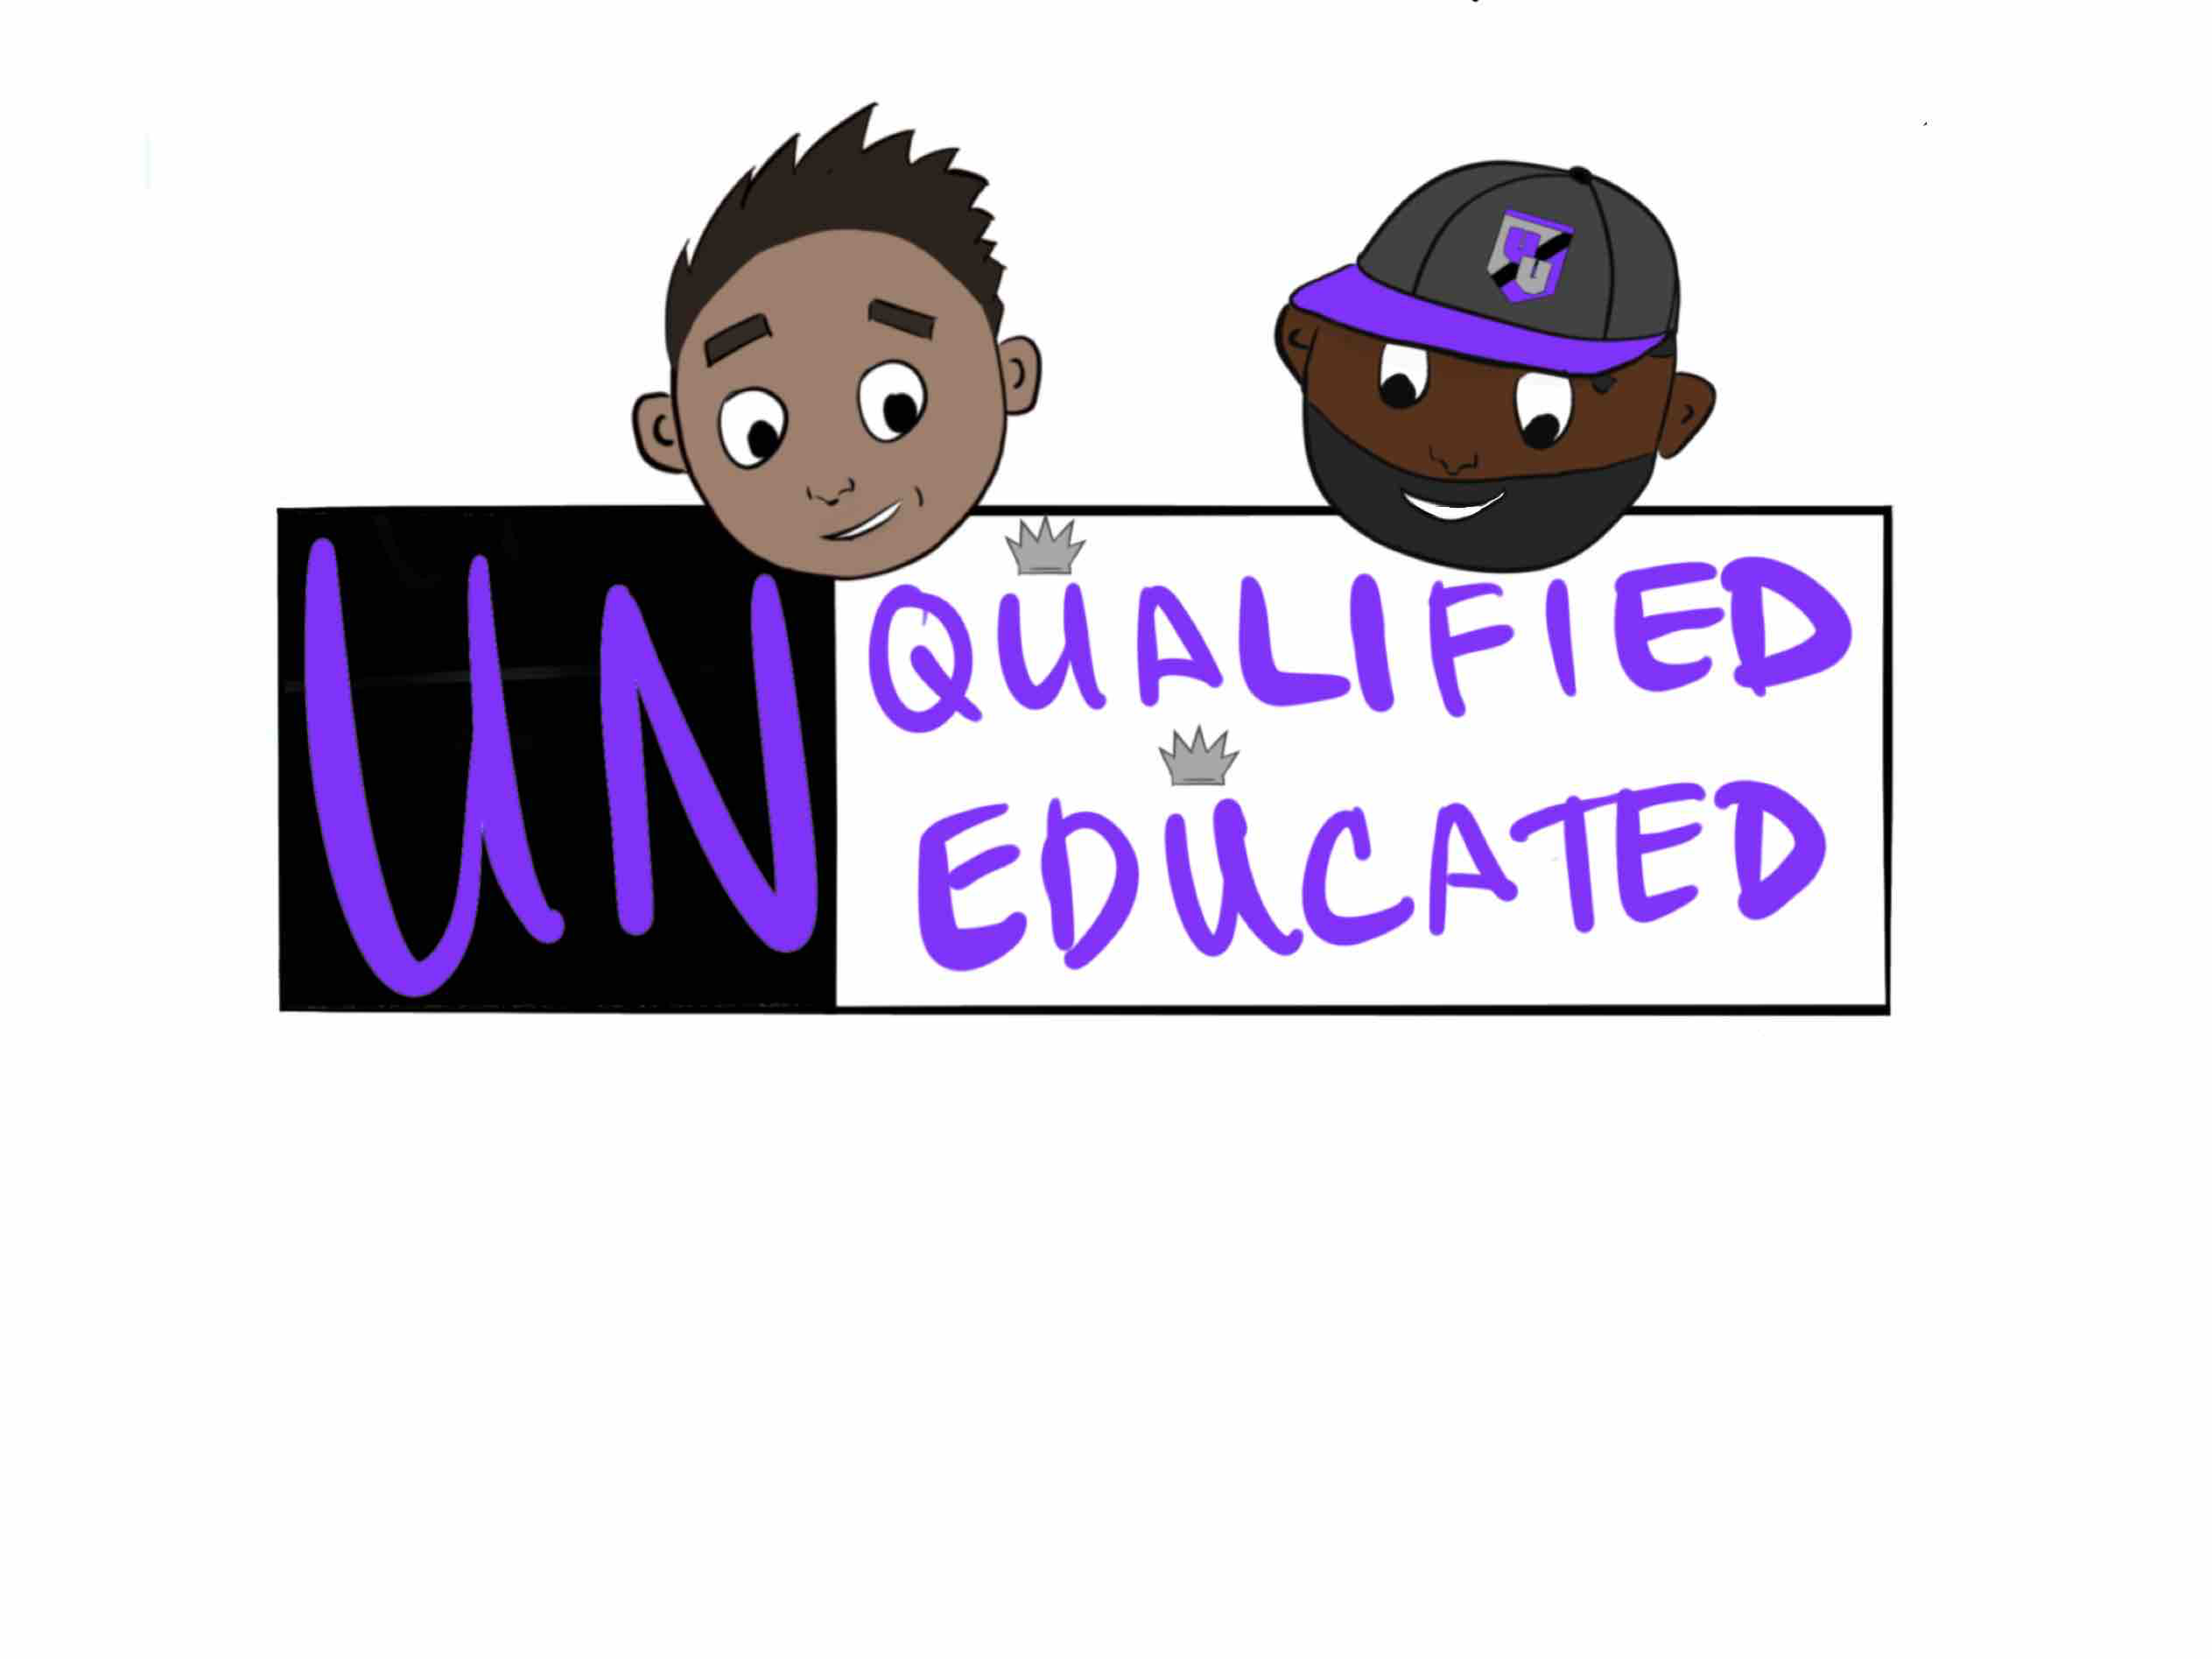 Unqualified and Uneducated